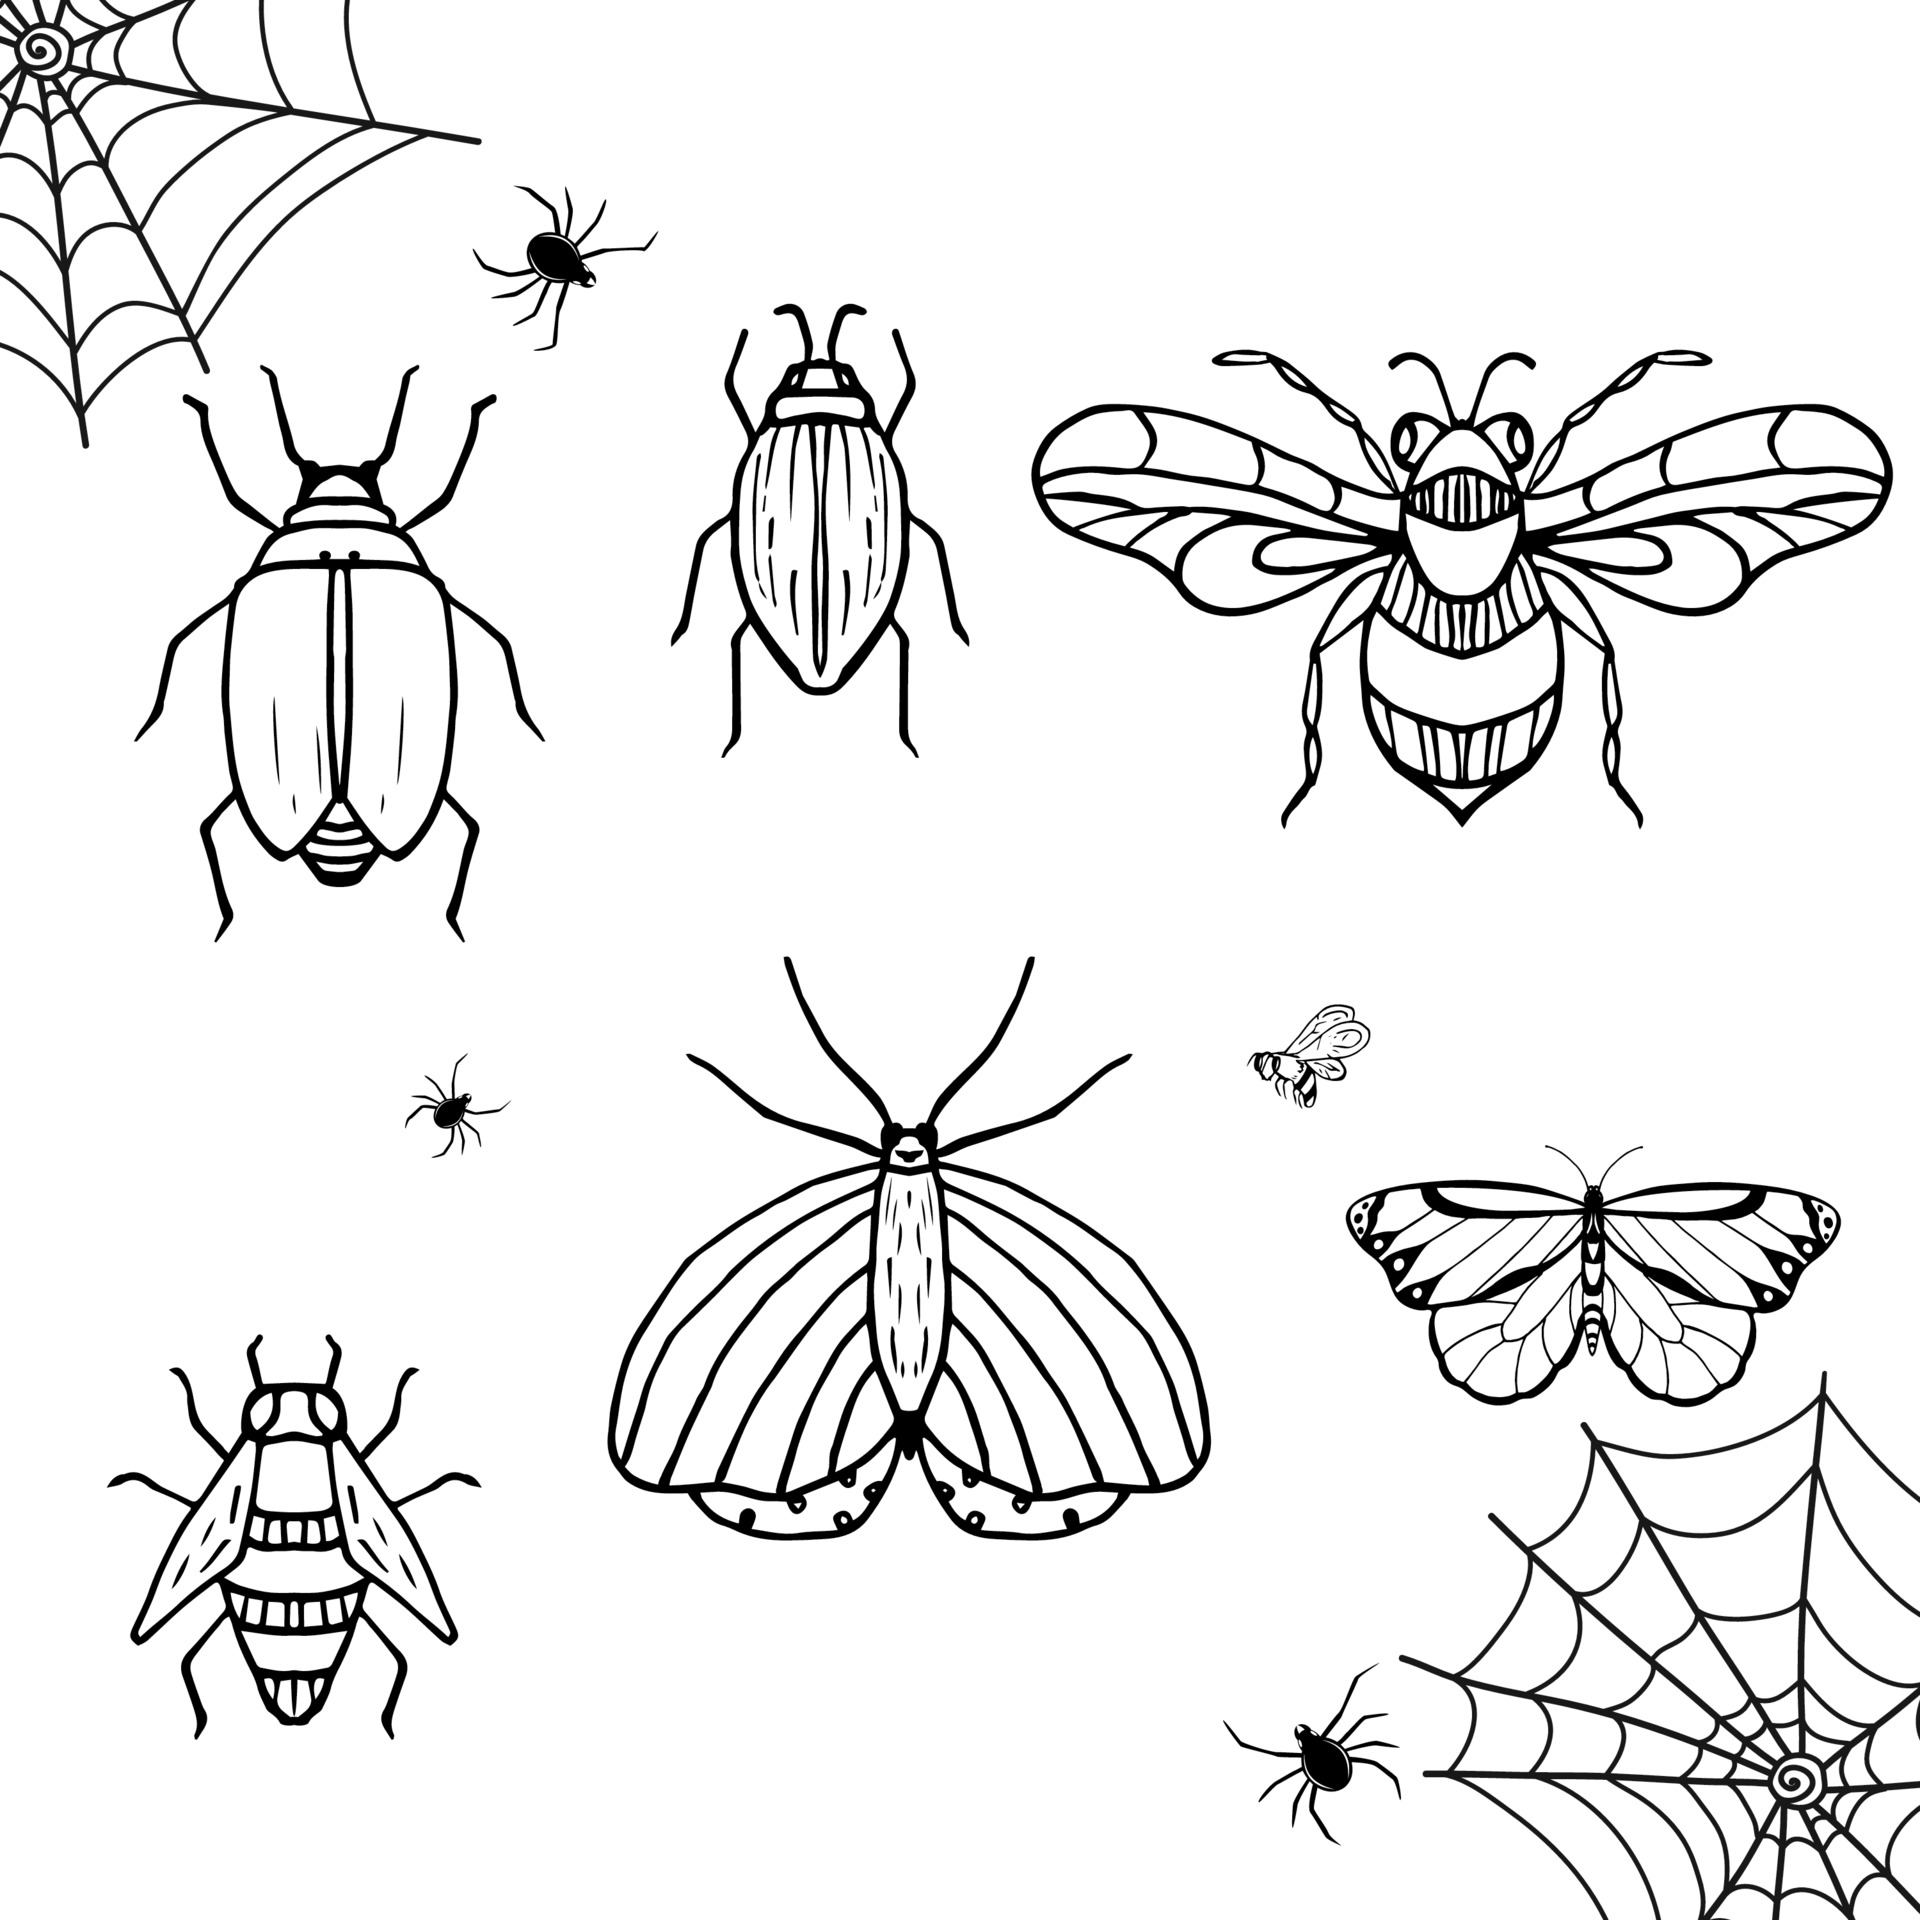 Insect Sketch Images  Free Download on Freepik